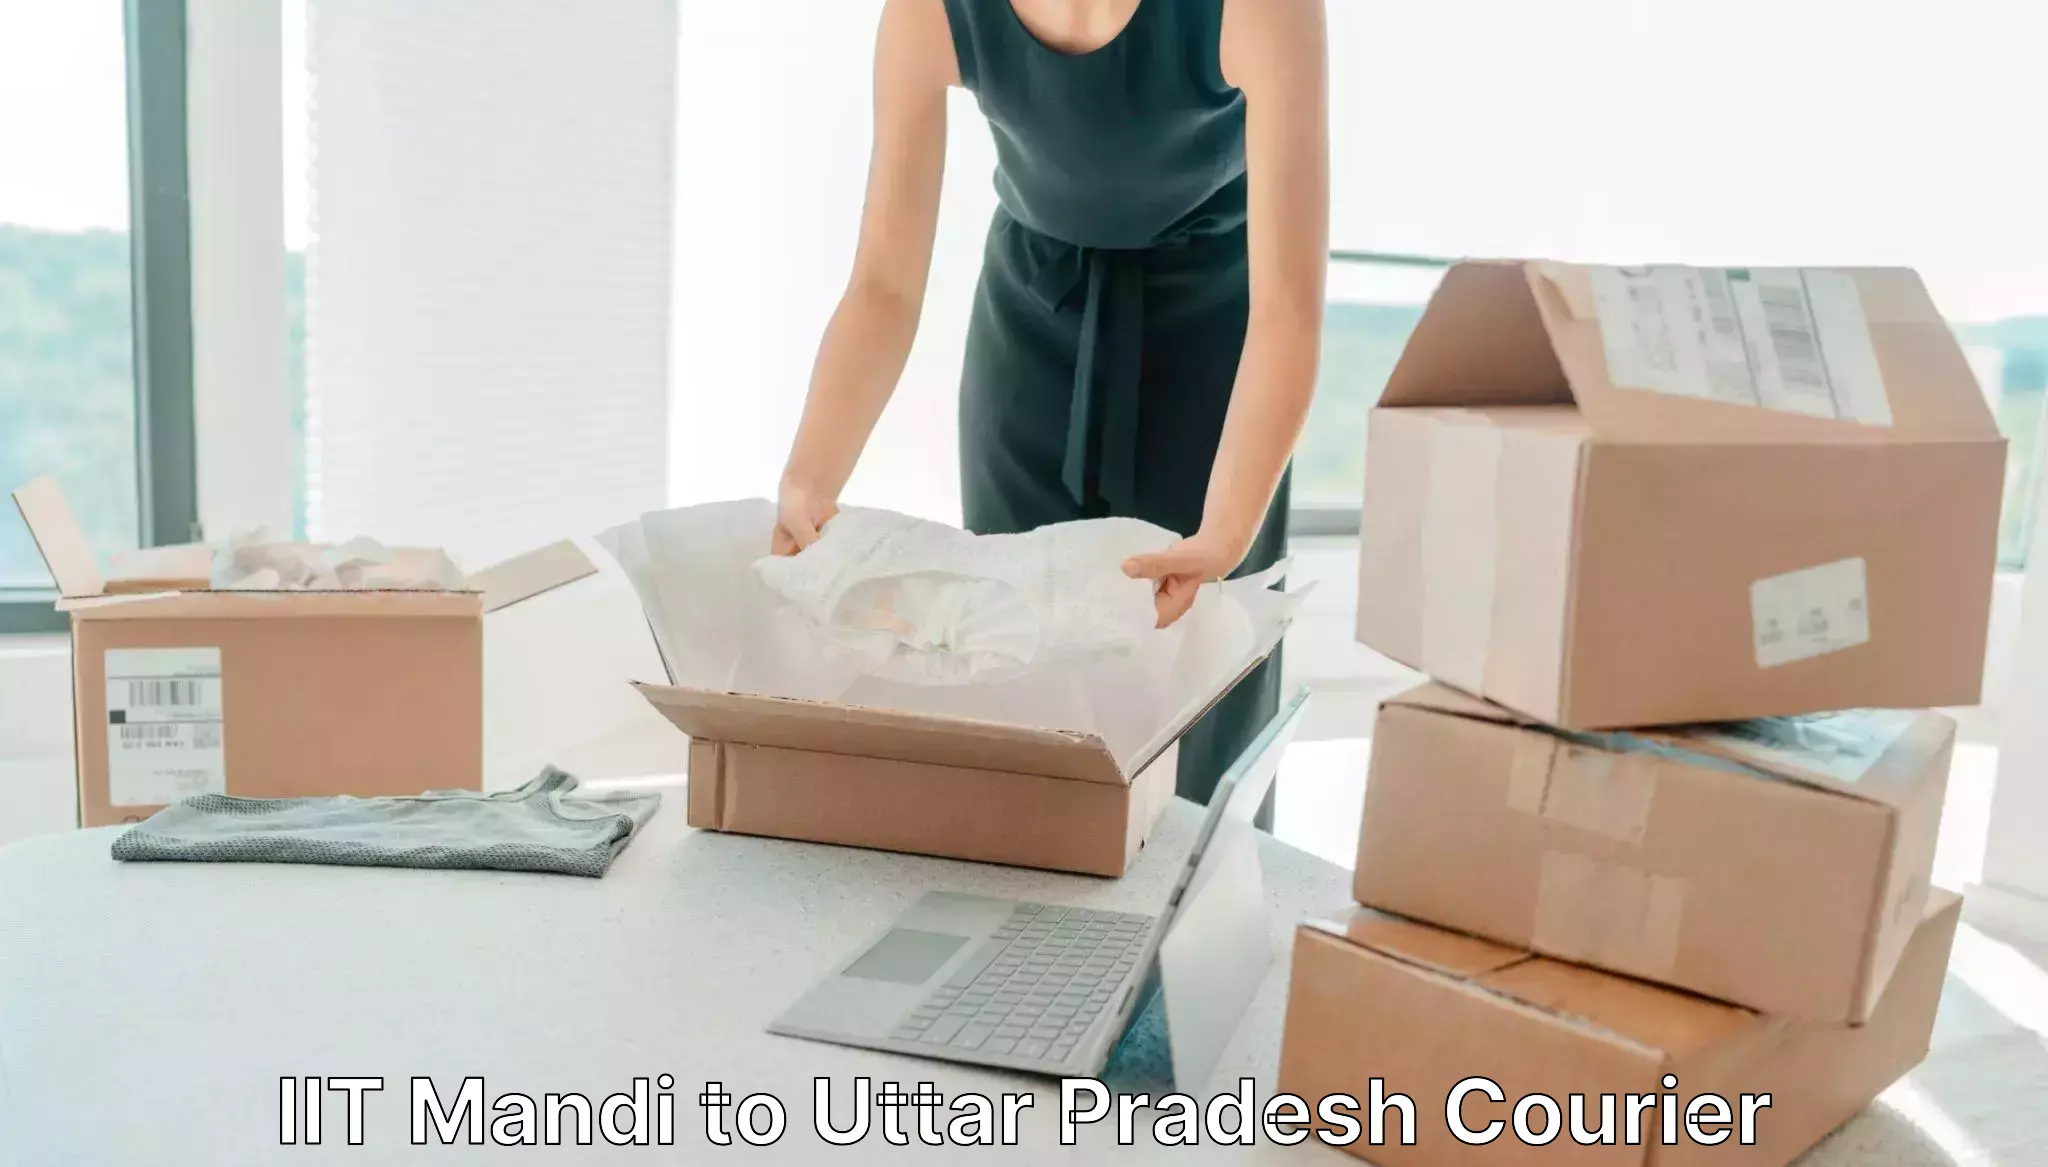 Multi-national courier services IIT Mandi to Firozabad